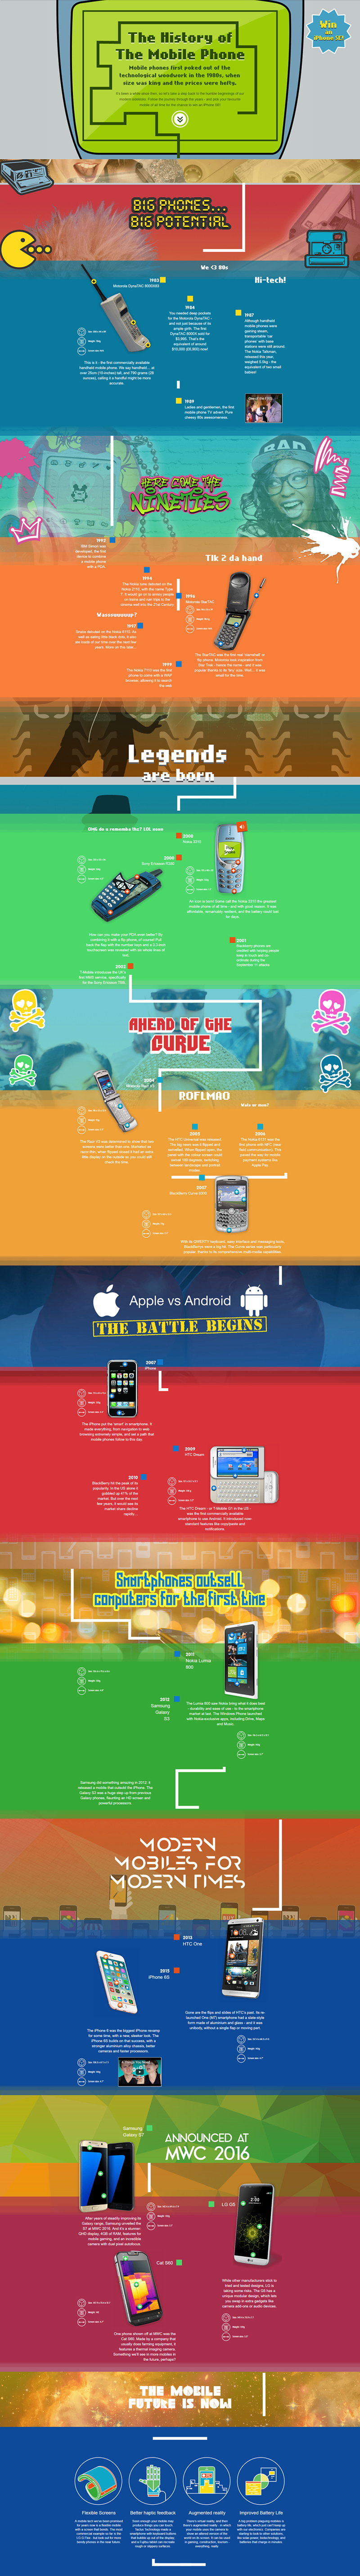 The-History-of-Mobile-Phones-2